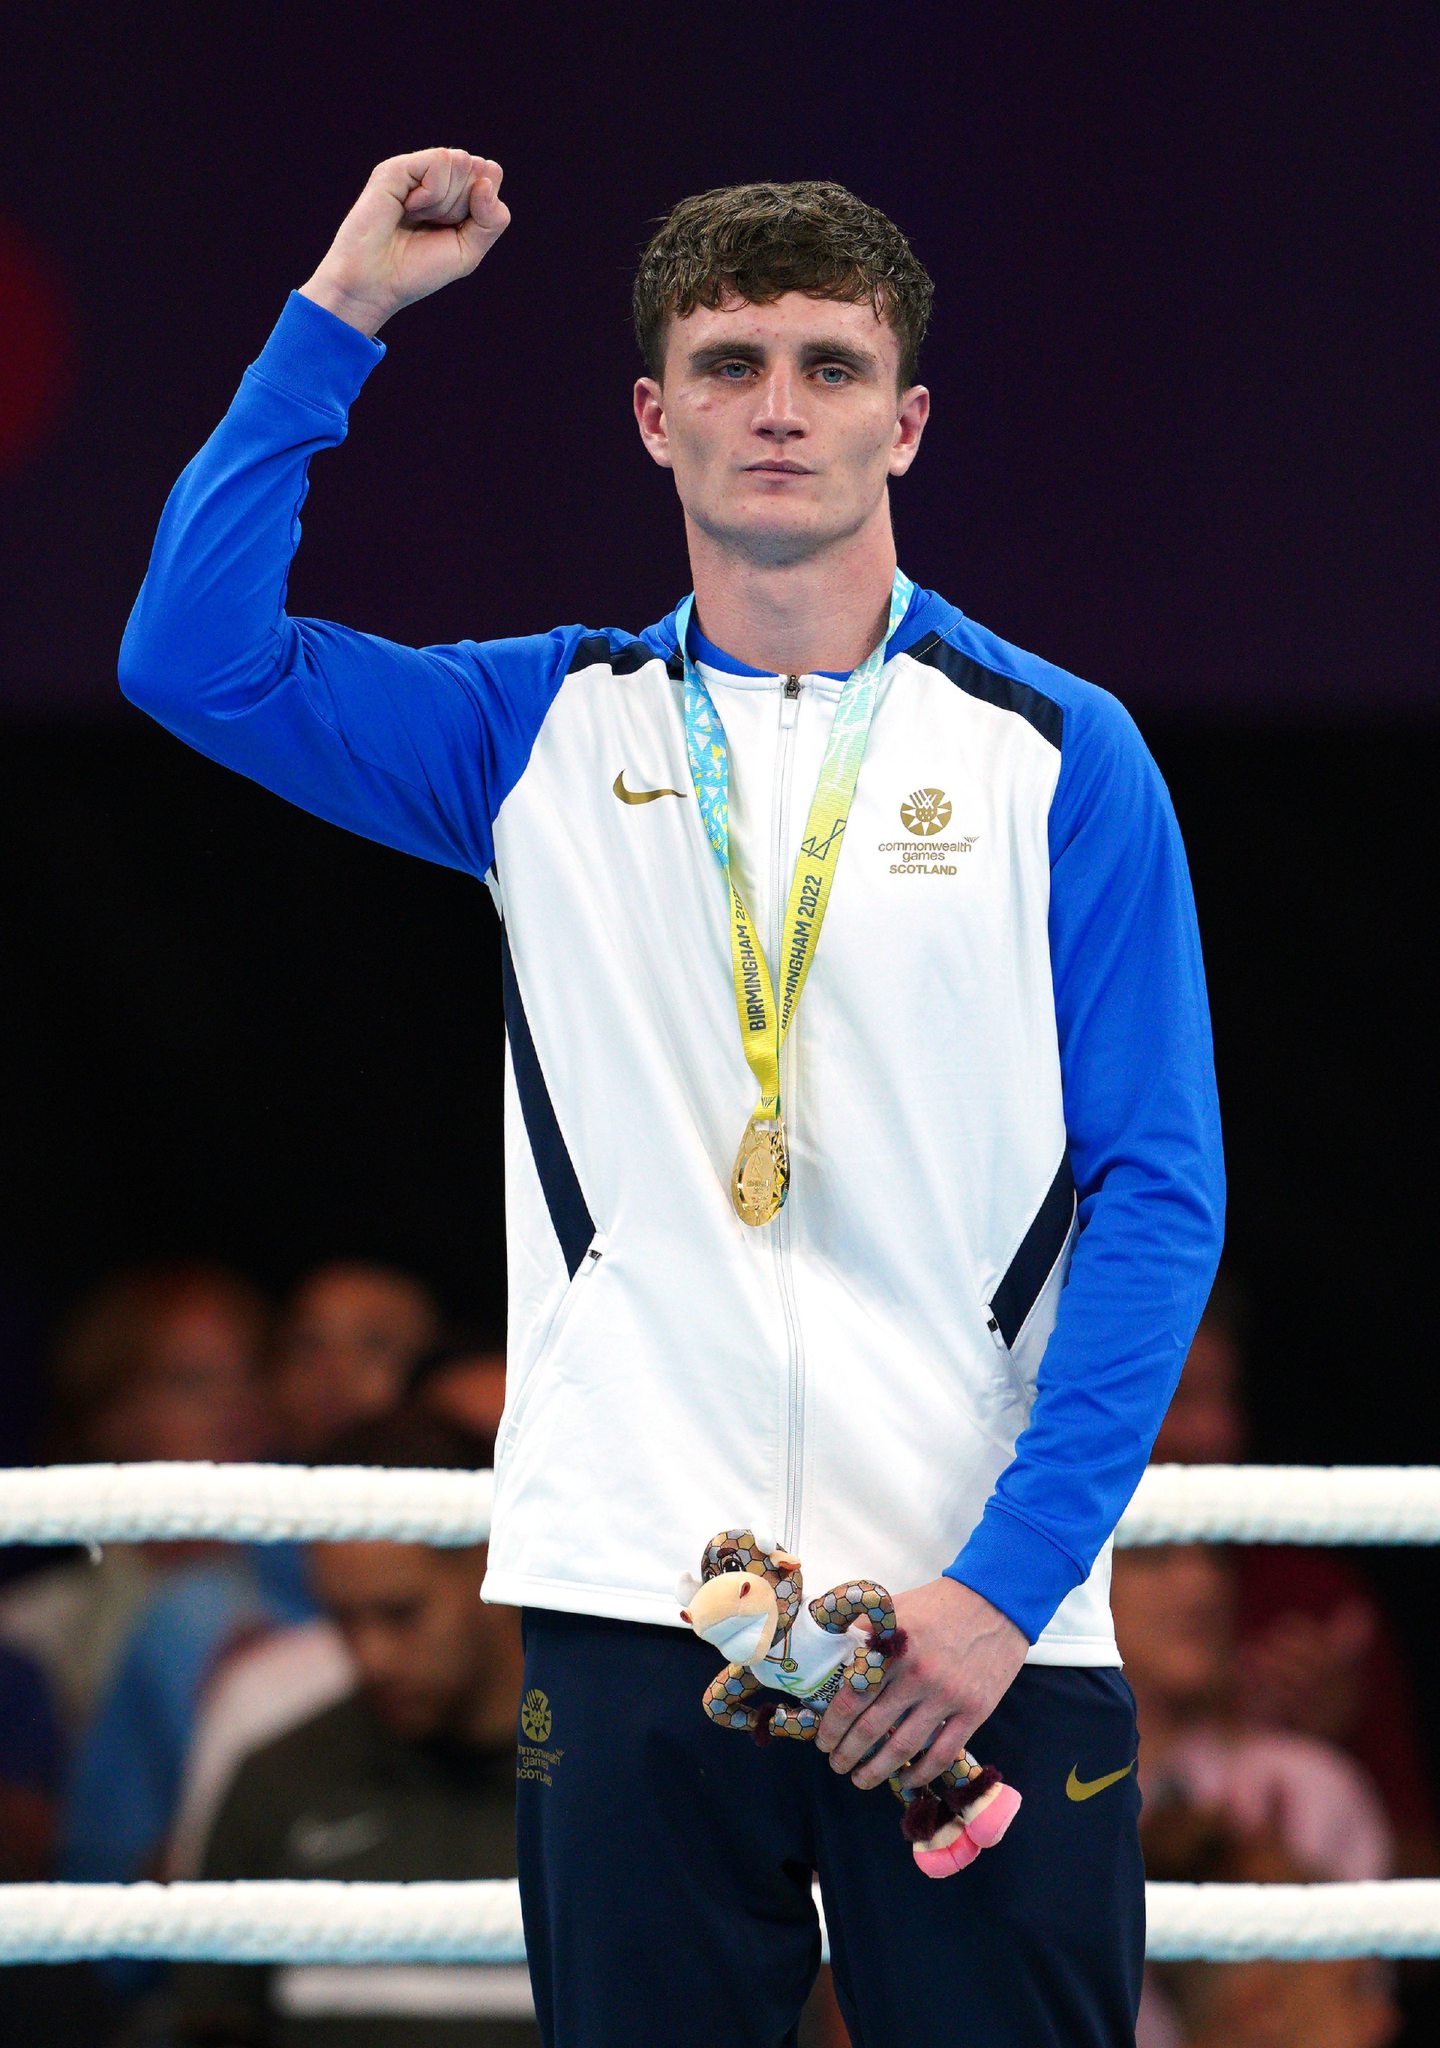 Sam Hickey proudly stands with his gold medal in Birmingham.